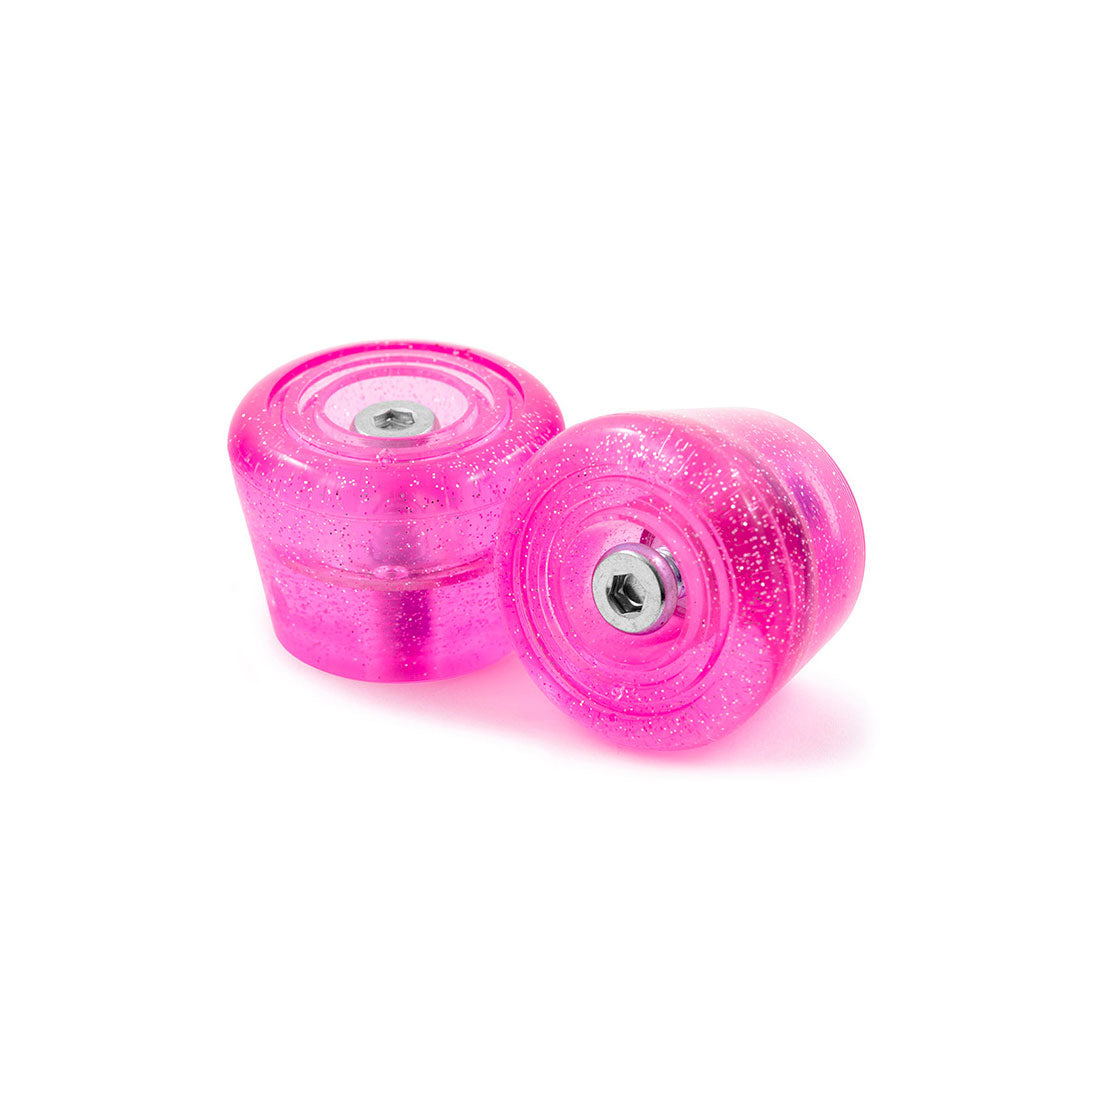 Rio Roller Toe Stops 2pk Pink Glitter Roller Skate Hardware and Parts